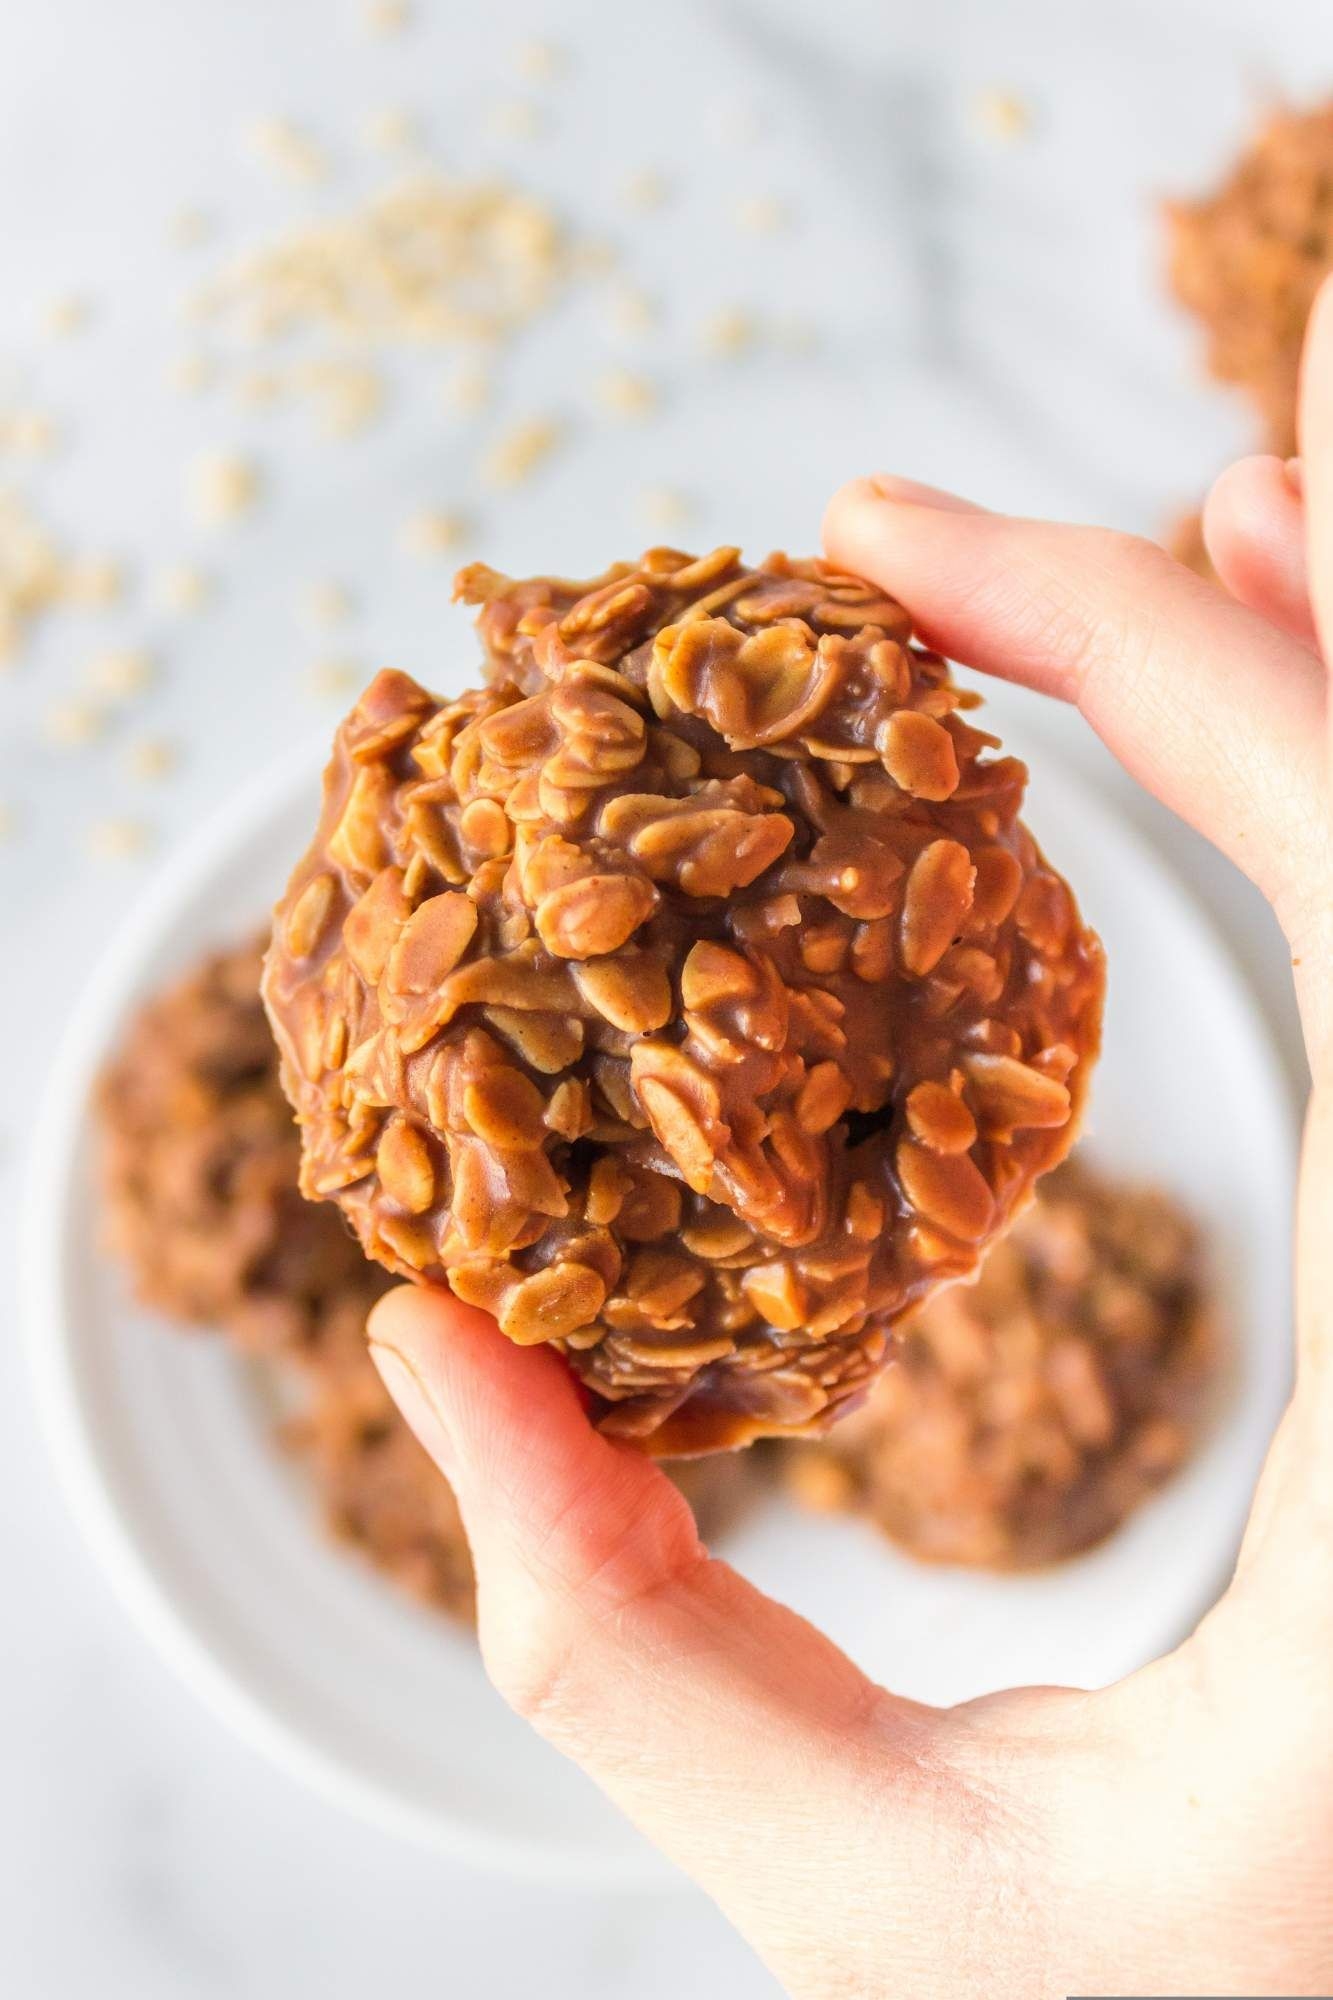 No bake oatmeal cookies with chocolate and peanut butter being held up by a hand.